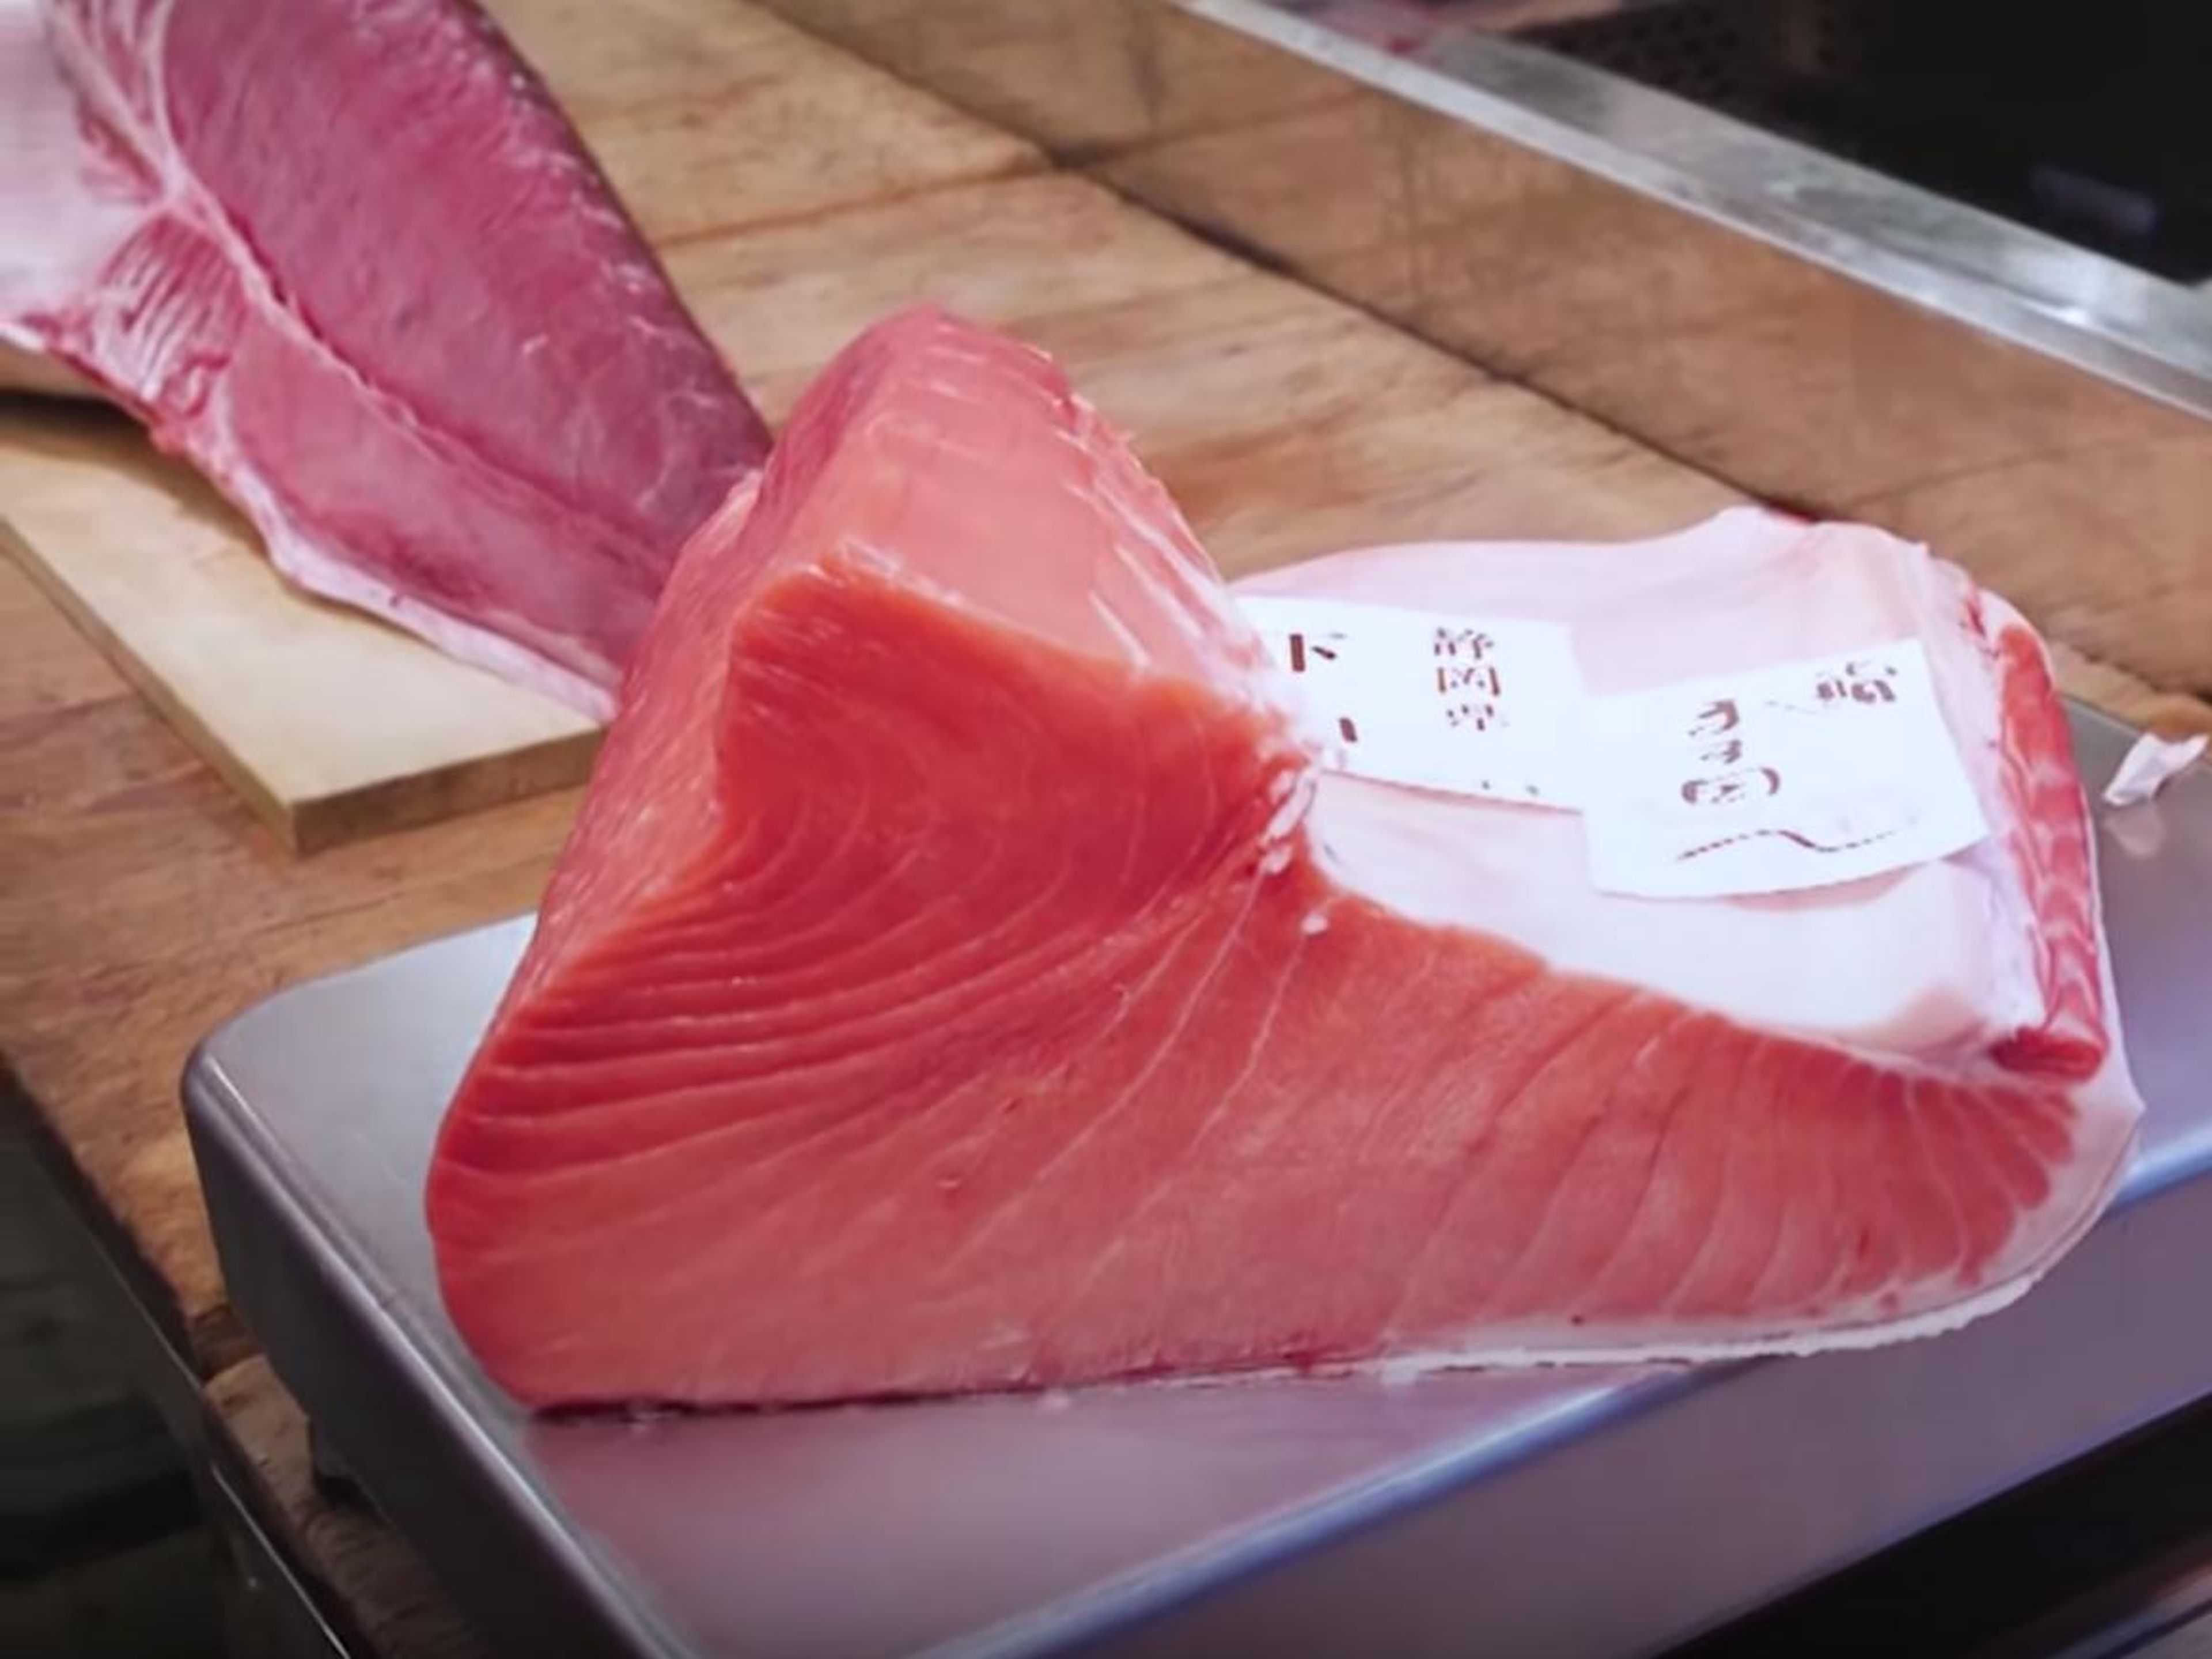 At the first Tsukiji market fish auction of 2013, a bluefin tuna sold for a record-breaking $1.8 million — that's a great deal more than the 2012 highest bid, which set the all-time record at $646,000.